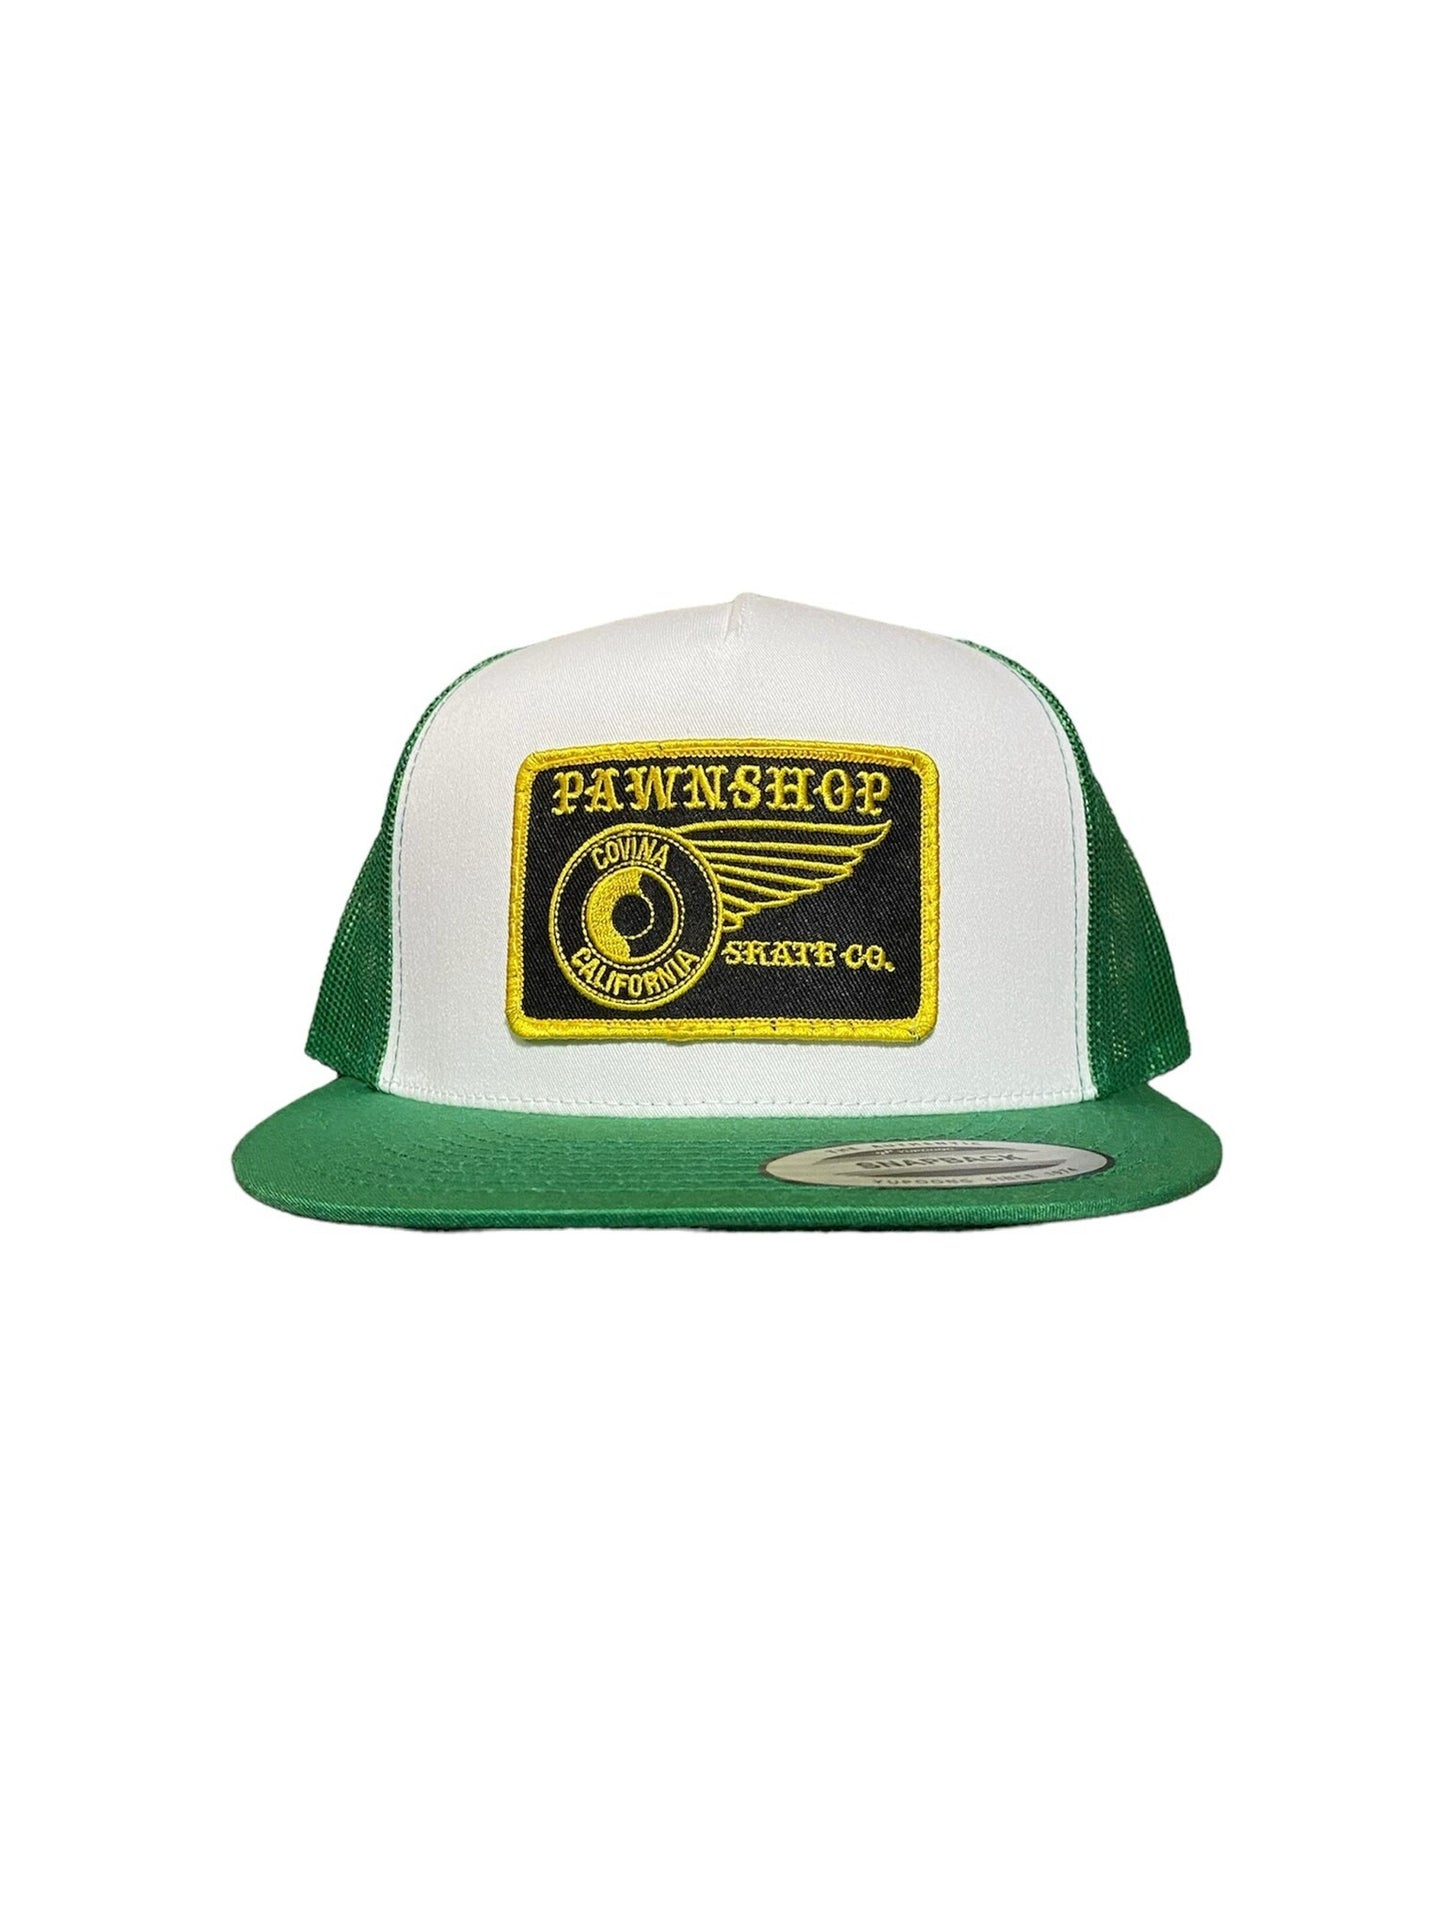 Pawnshop wing and wheel trucker hat green/black/gold